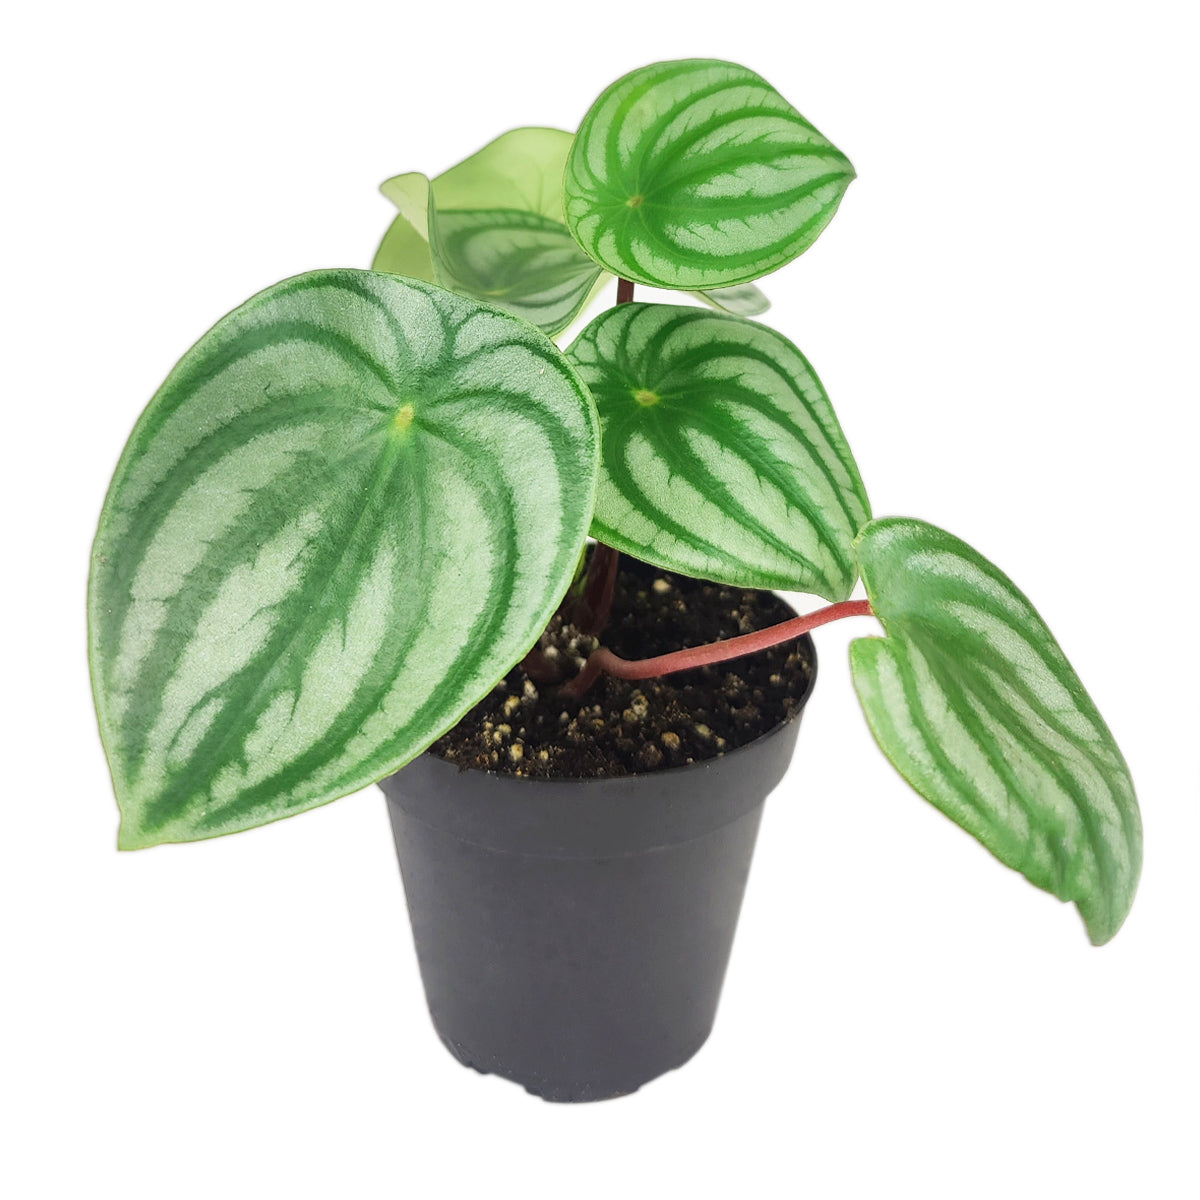 Peperomia watermelon, trendy houseplant with unique foliage, Peperomia Watermelon for sale, how to care for peperomia watermelon, easy care flowering houseplant, compact plant for small spaces